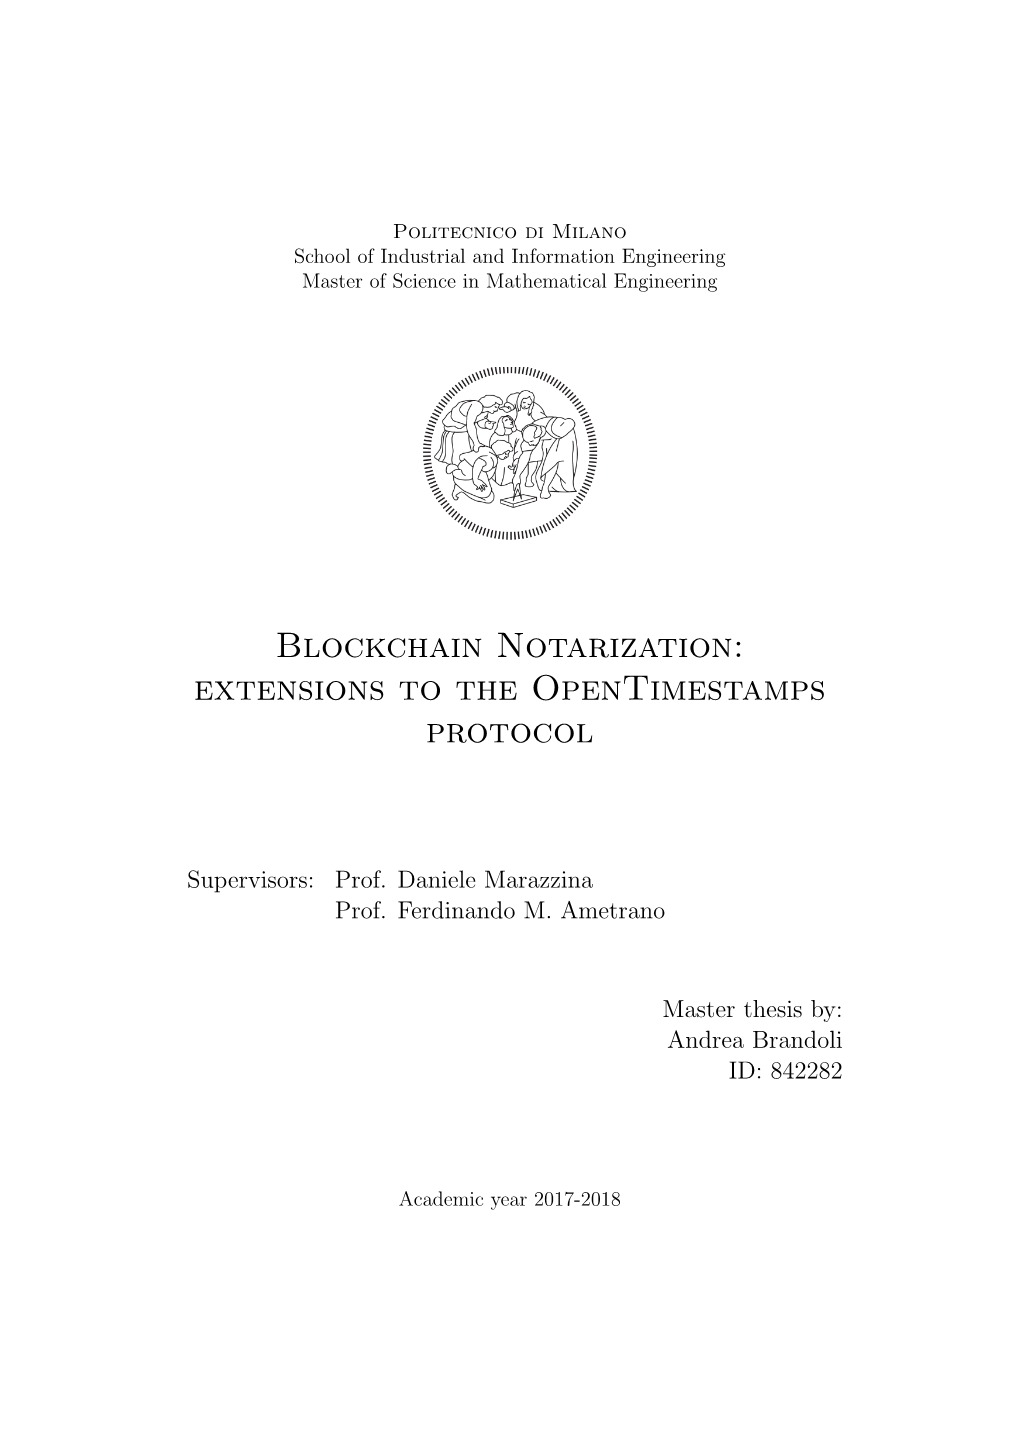 Blockchain Notarization: Extensions to the Opentimestamps Protocol